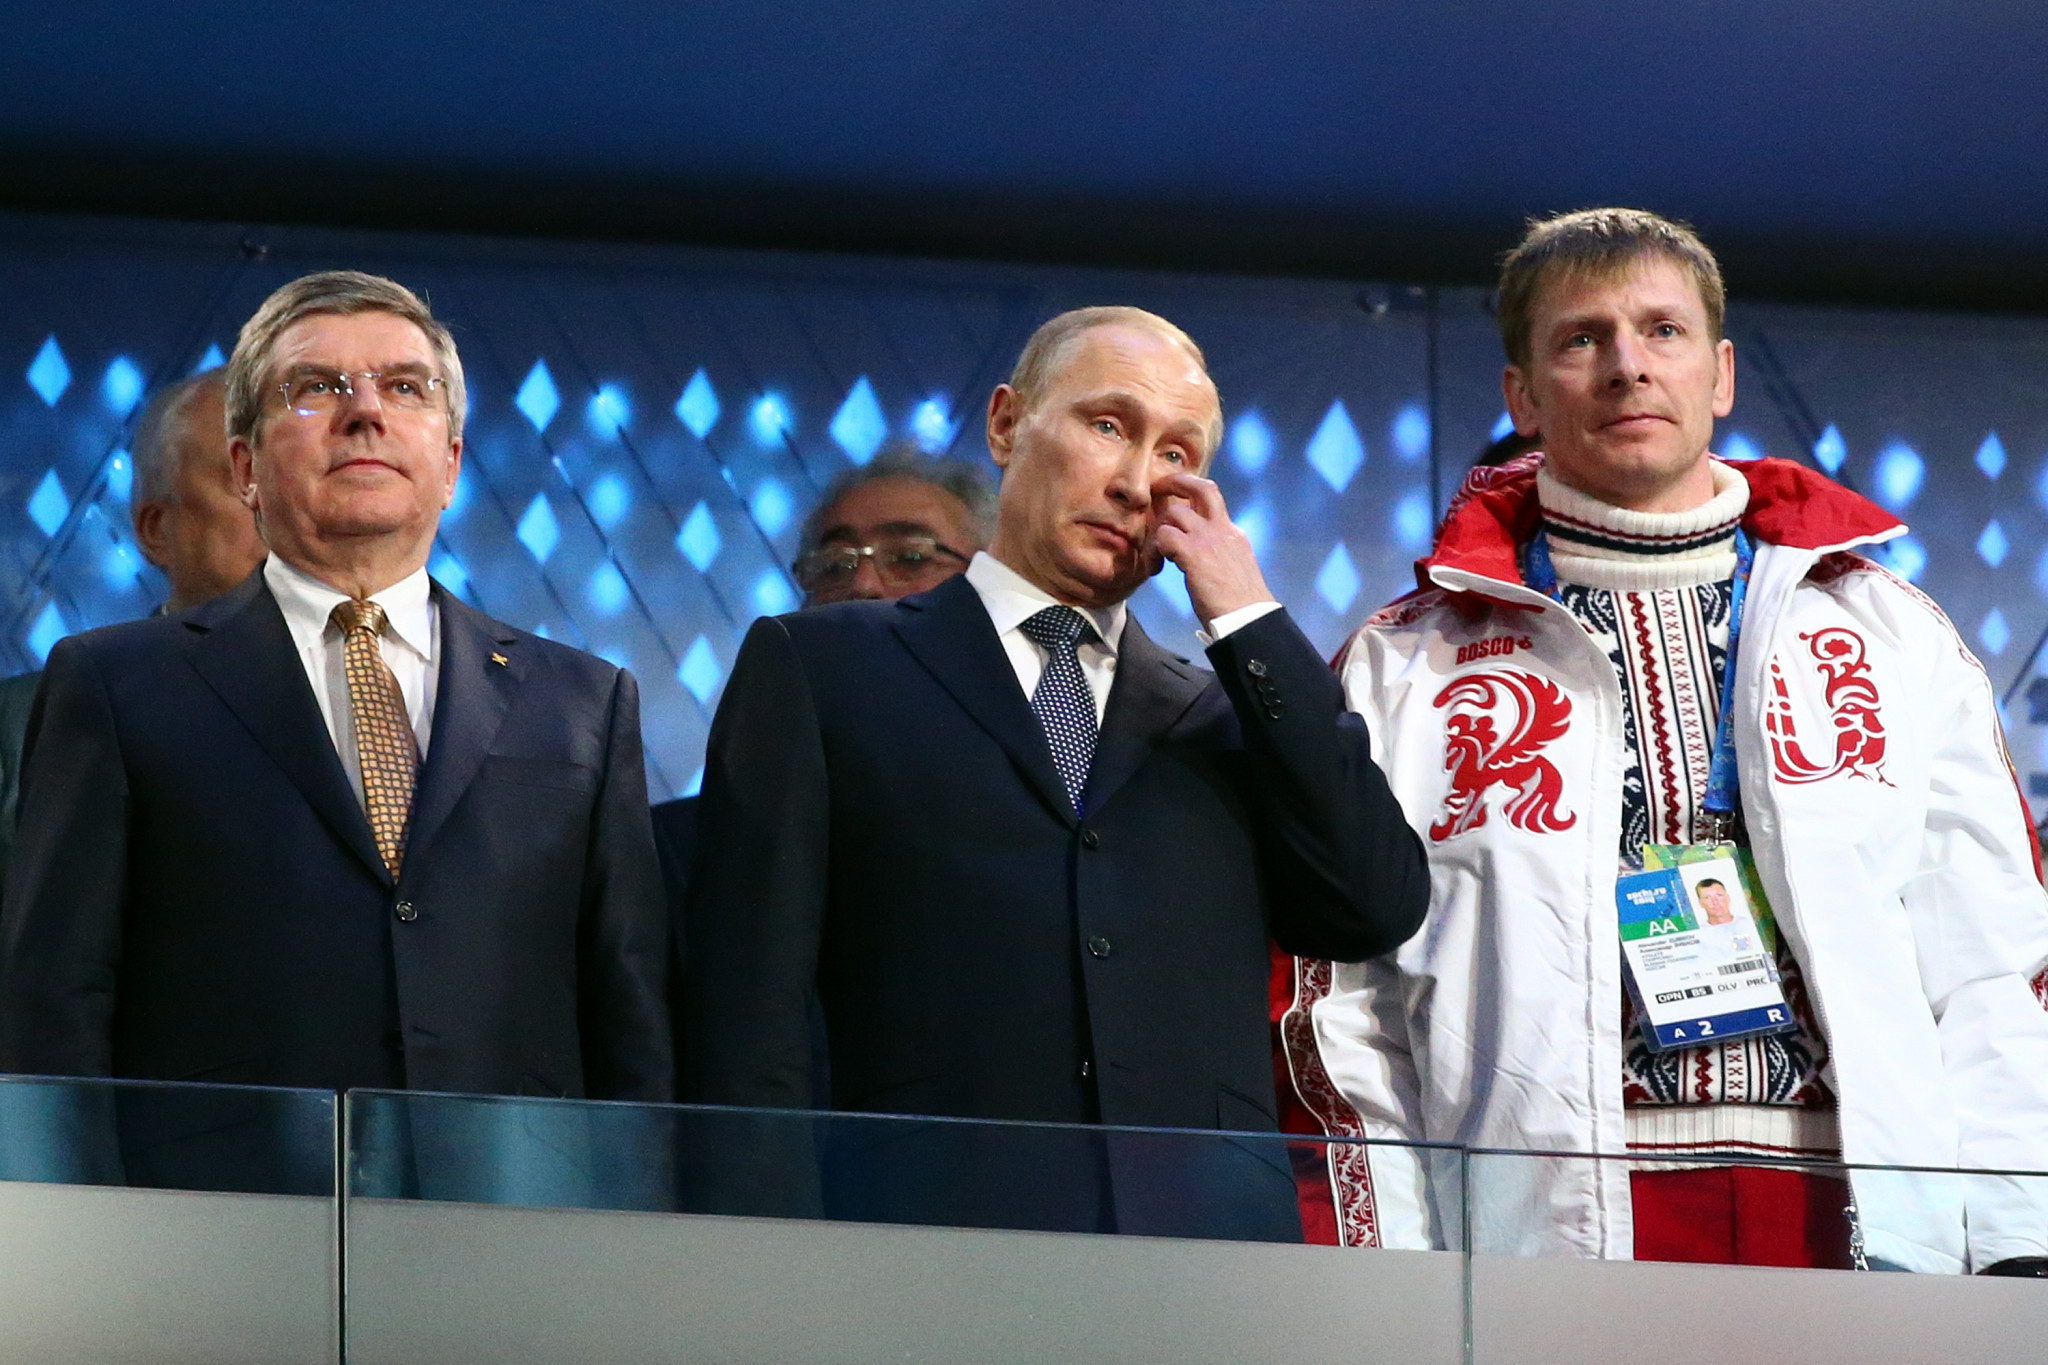 RBSF President Alexander Zubkov, right, is among the athletes to have been sanctioned by the IOC for doping at Sochi 2014, a decision which saw him stripped of two Olympic gold medals ©Getty Images